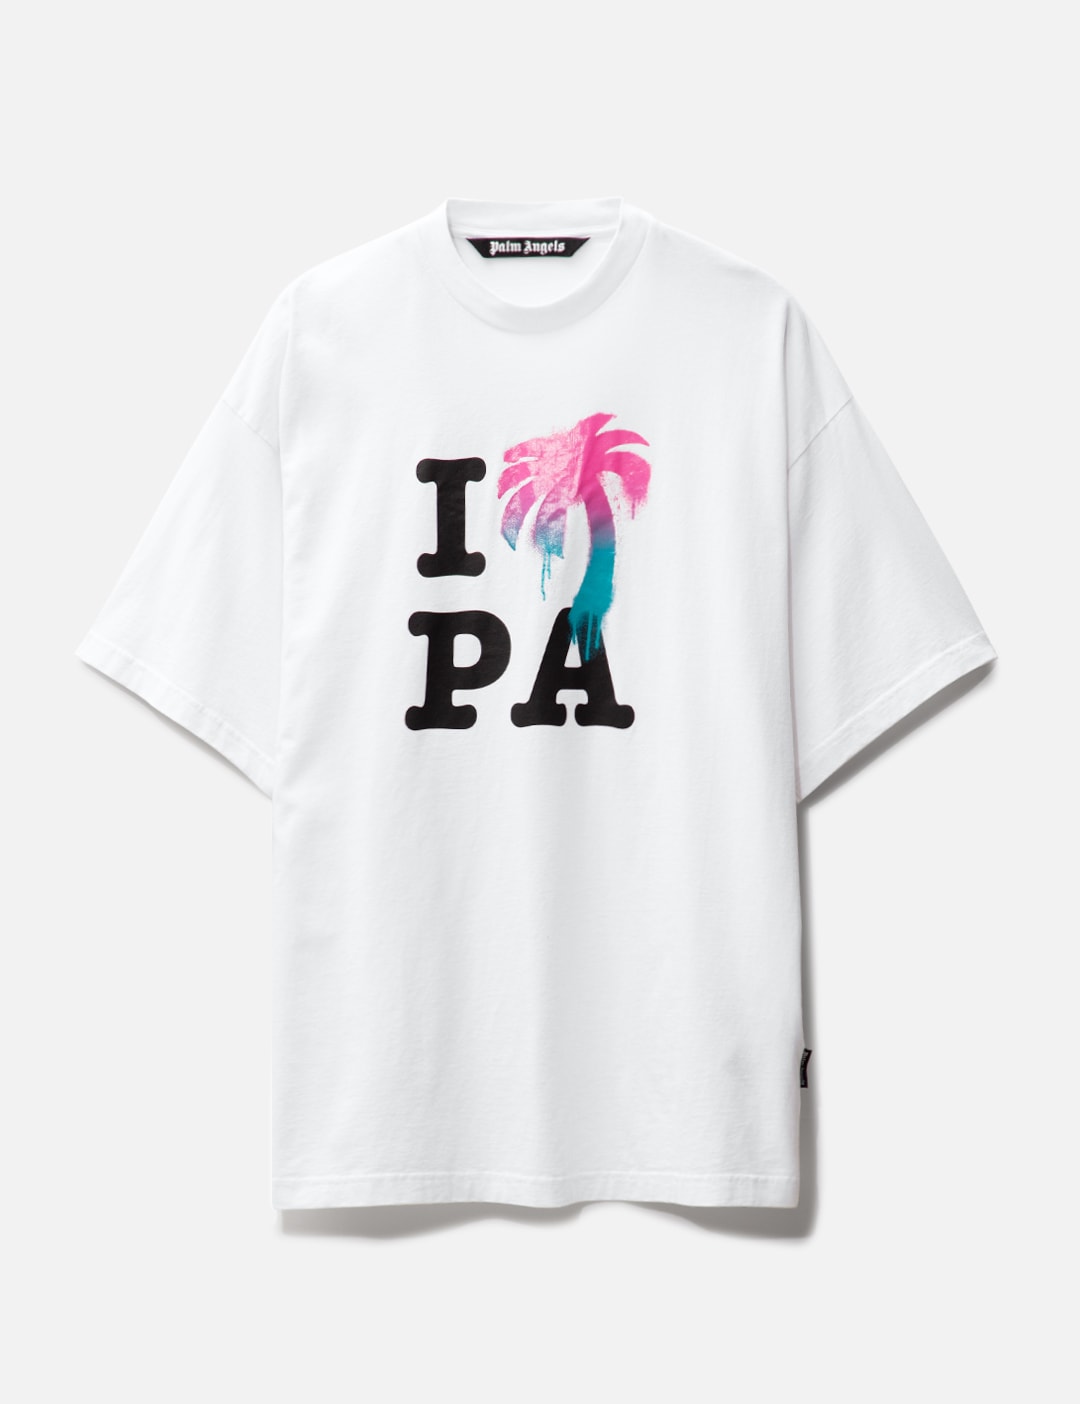 Palm Angels - I LOVE PA CLASSIC T-SHIRT  HBX - Globally Curated Fashion  and Lifestyle by Hypebeast